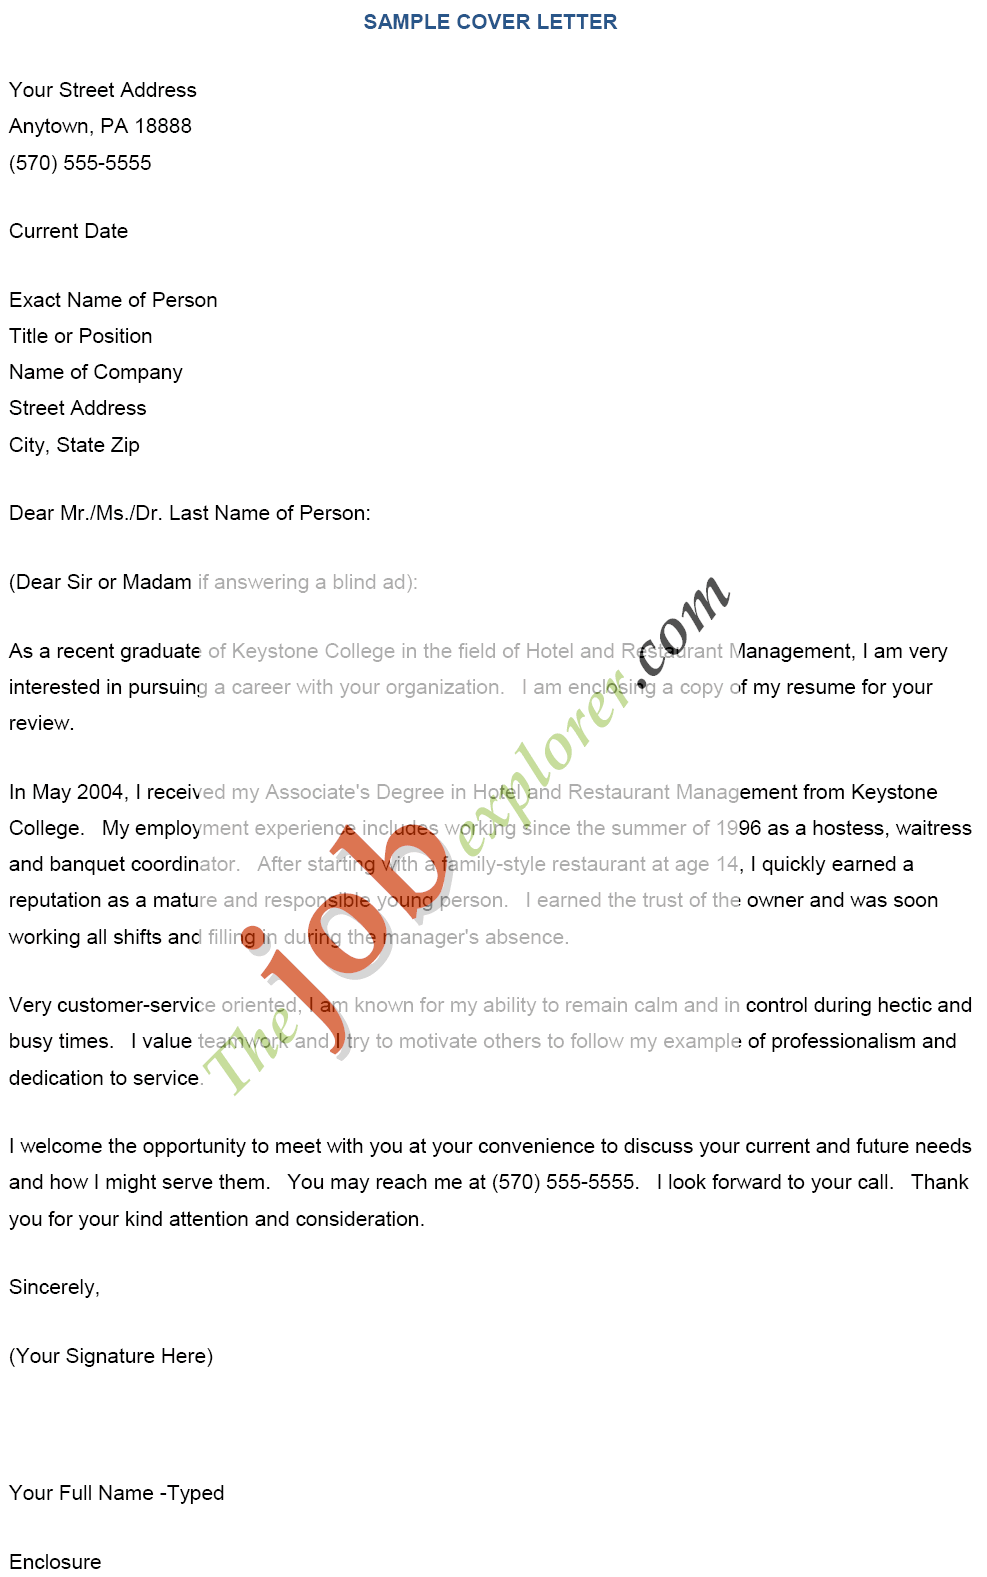 Addressing cover letter to unknown company